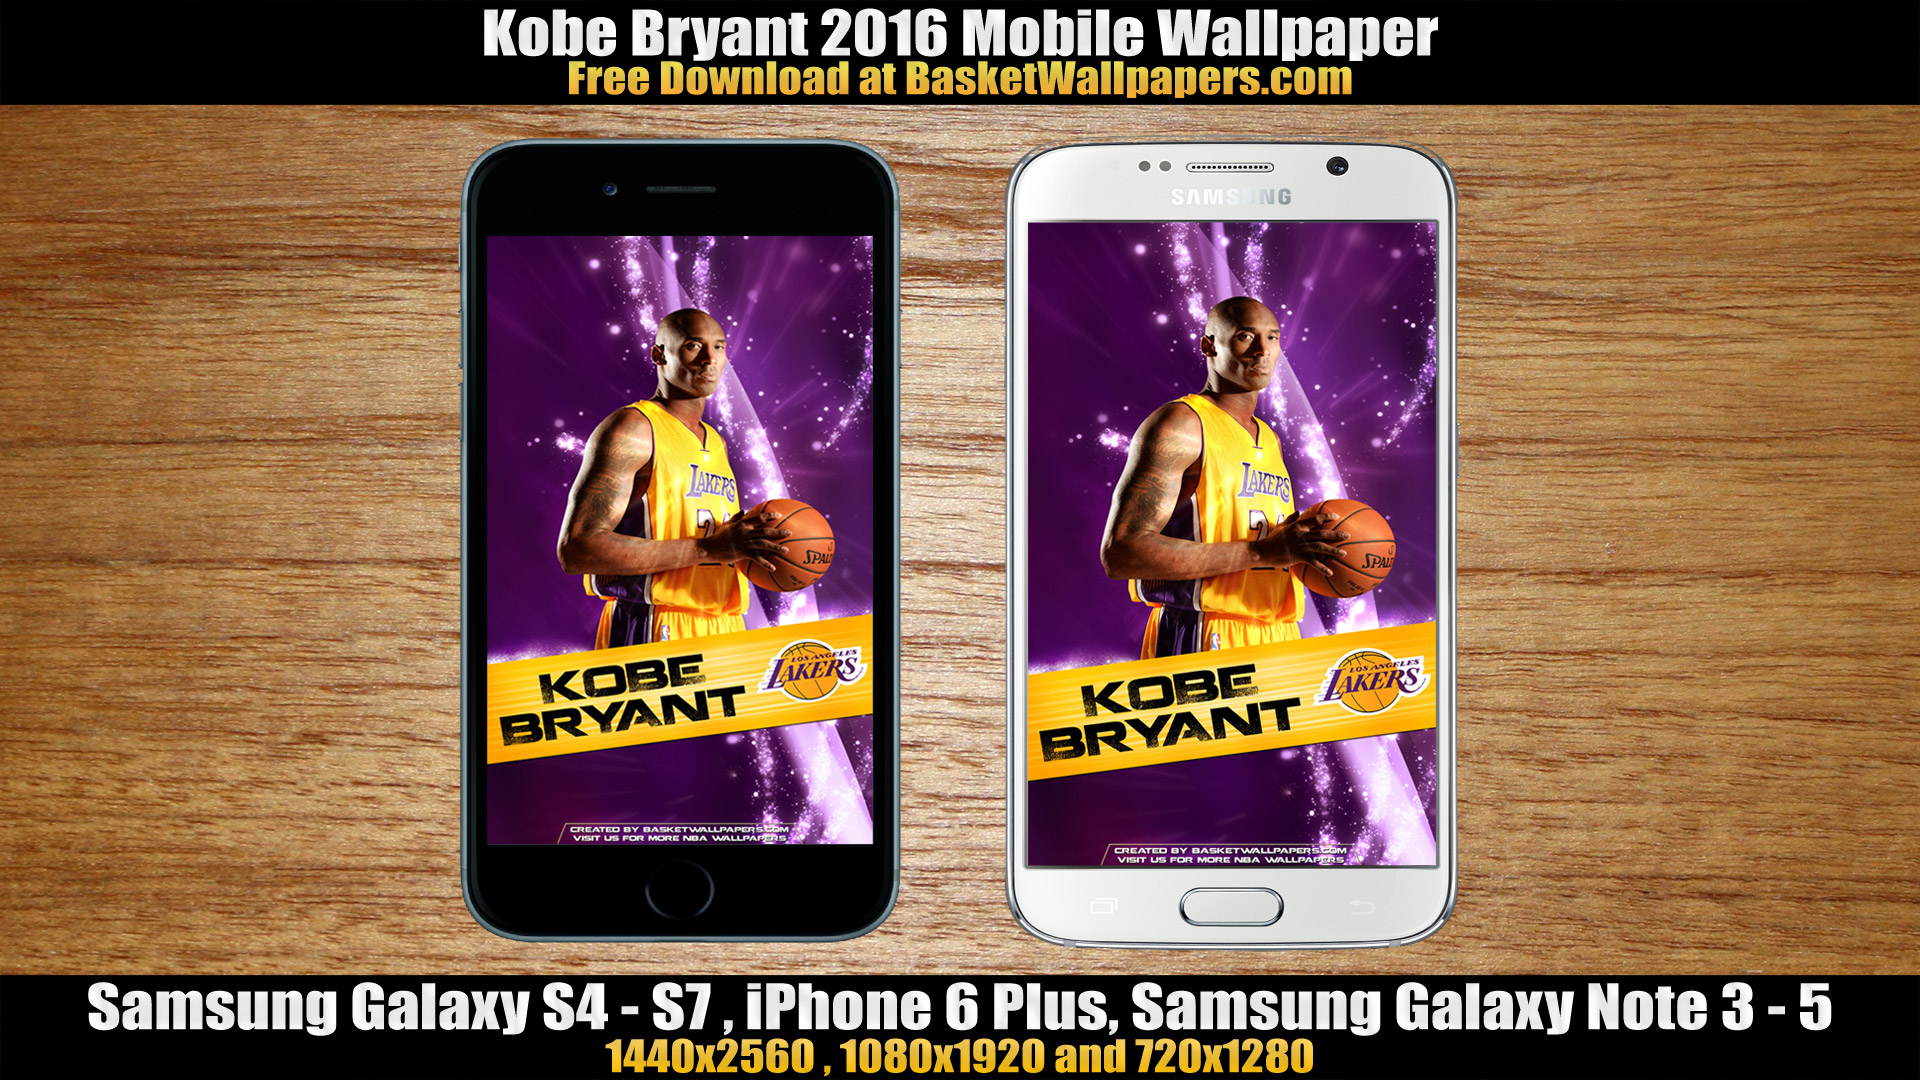 Download Lakers wallpapers for mobile phone, free Lakers HD